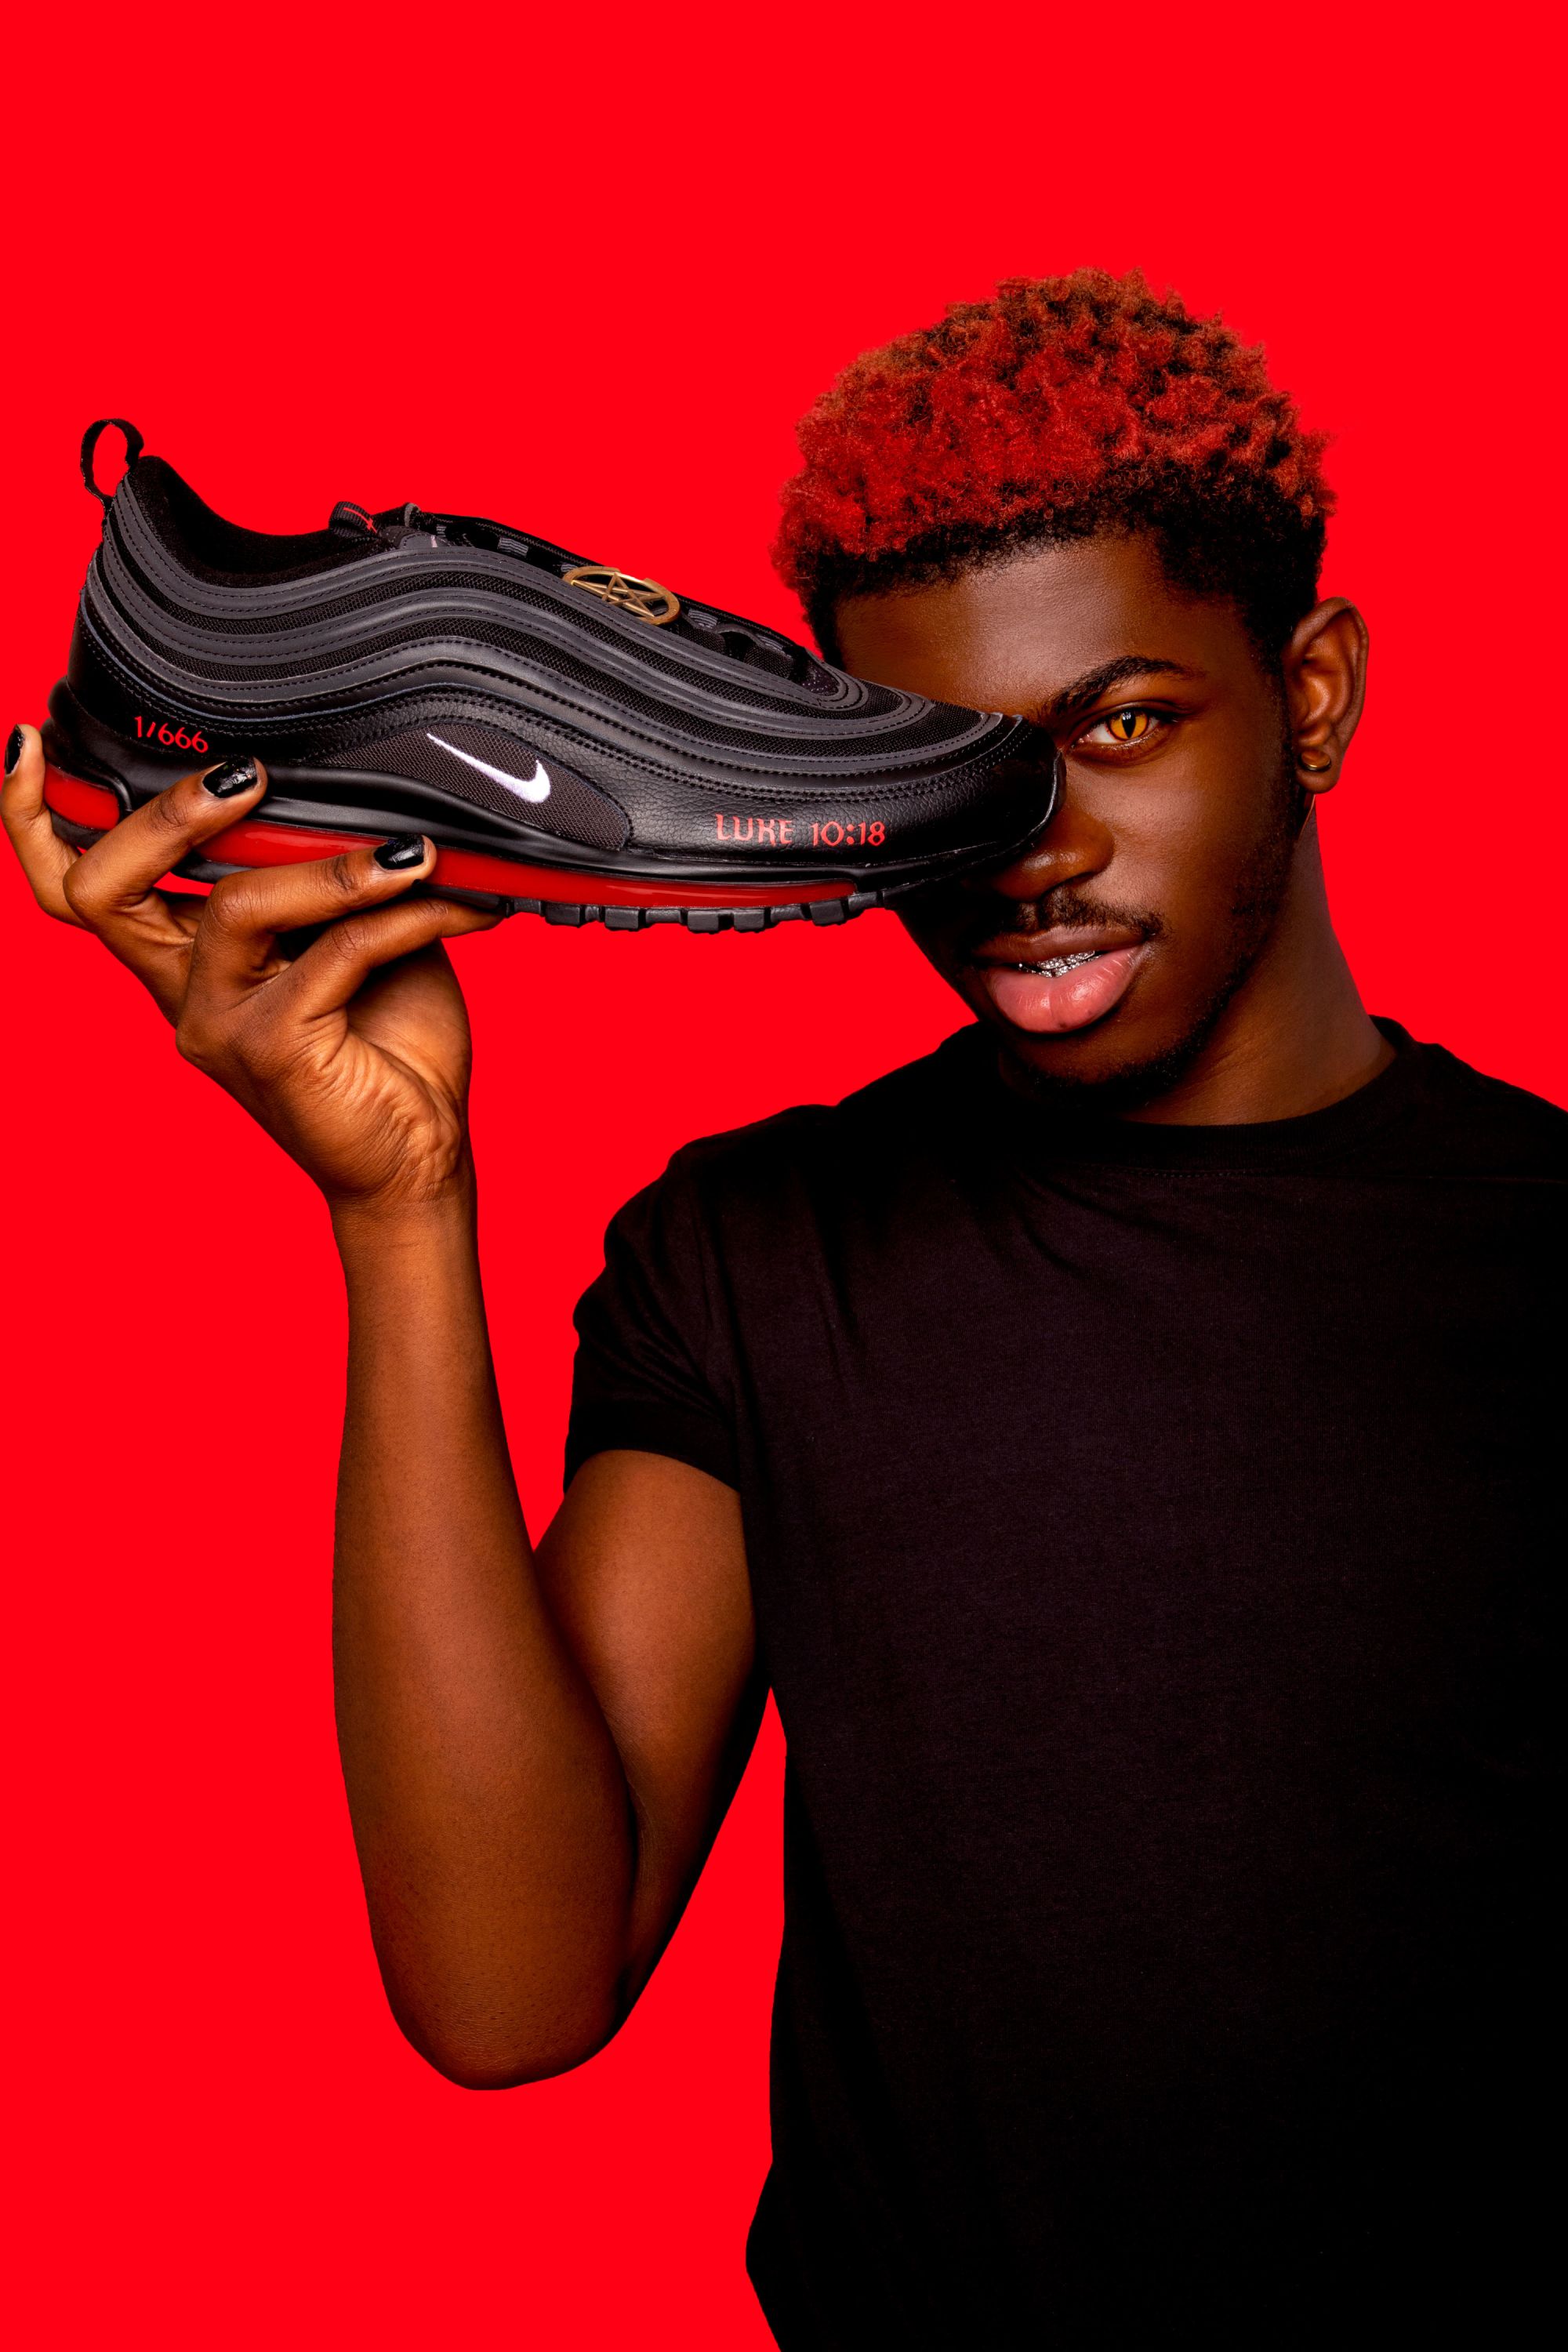 Lil Nas X's unofficial 'Satan' Nikes containing human blood sell out in  under a minute